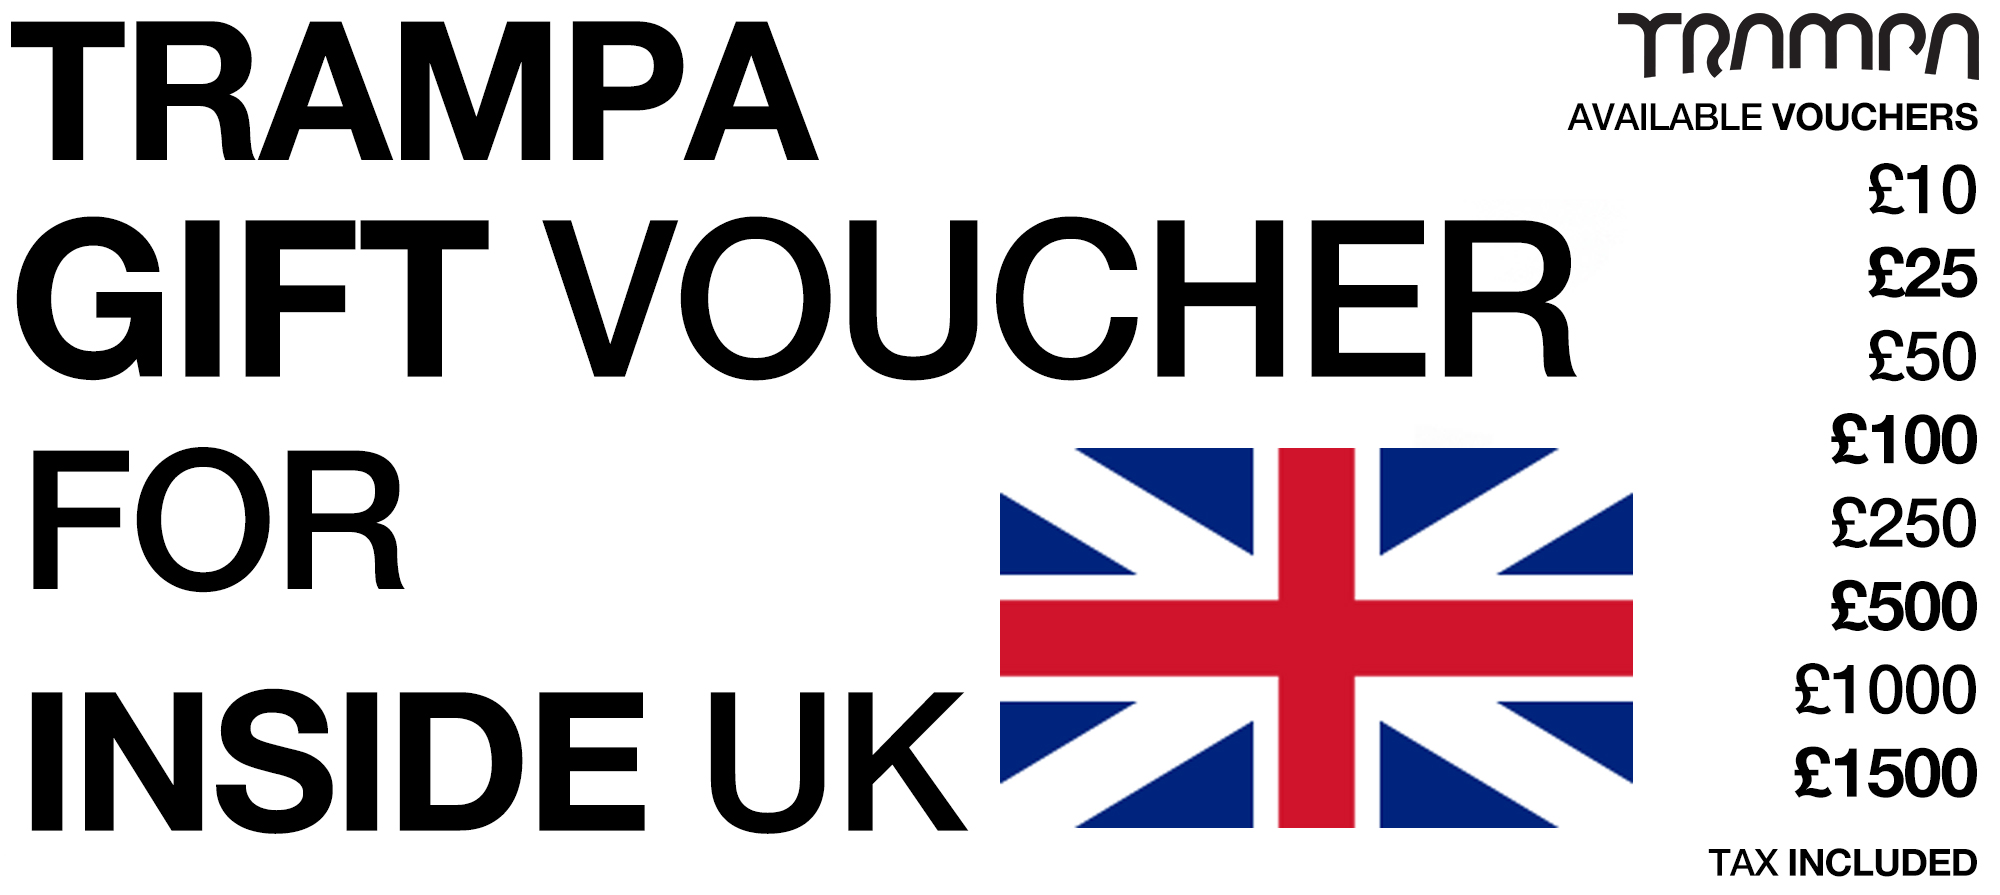 UK Gift Voucher - Includes Tax